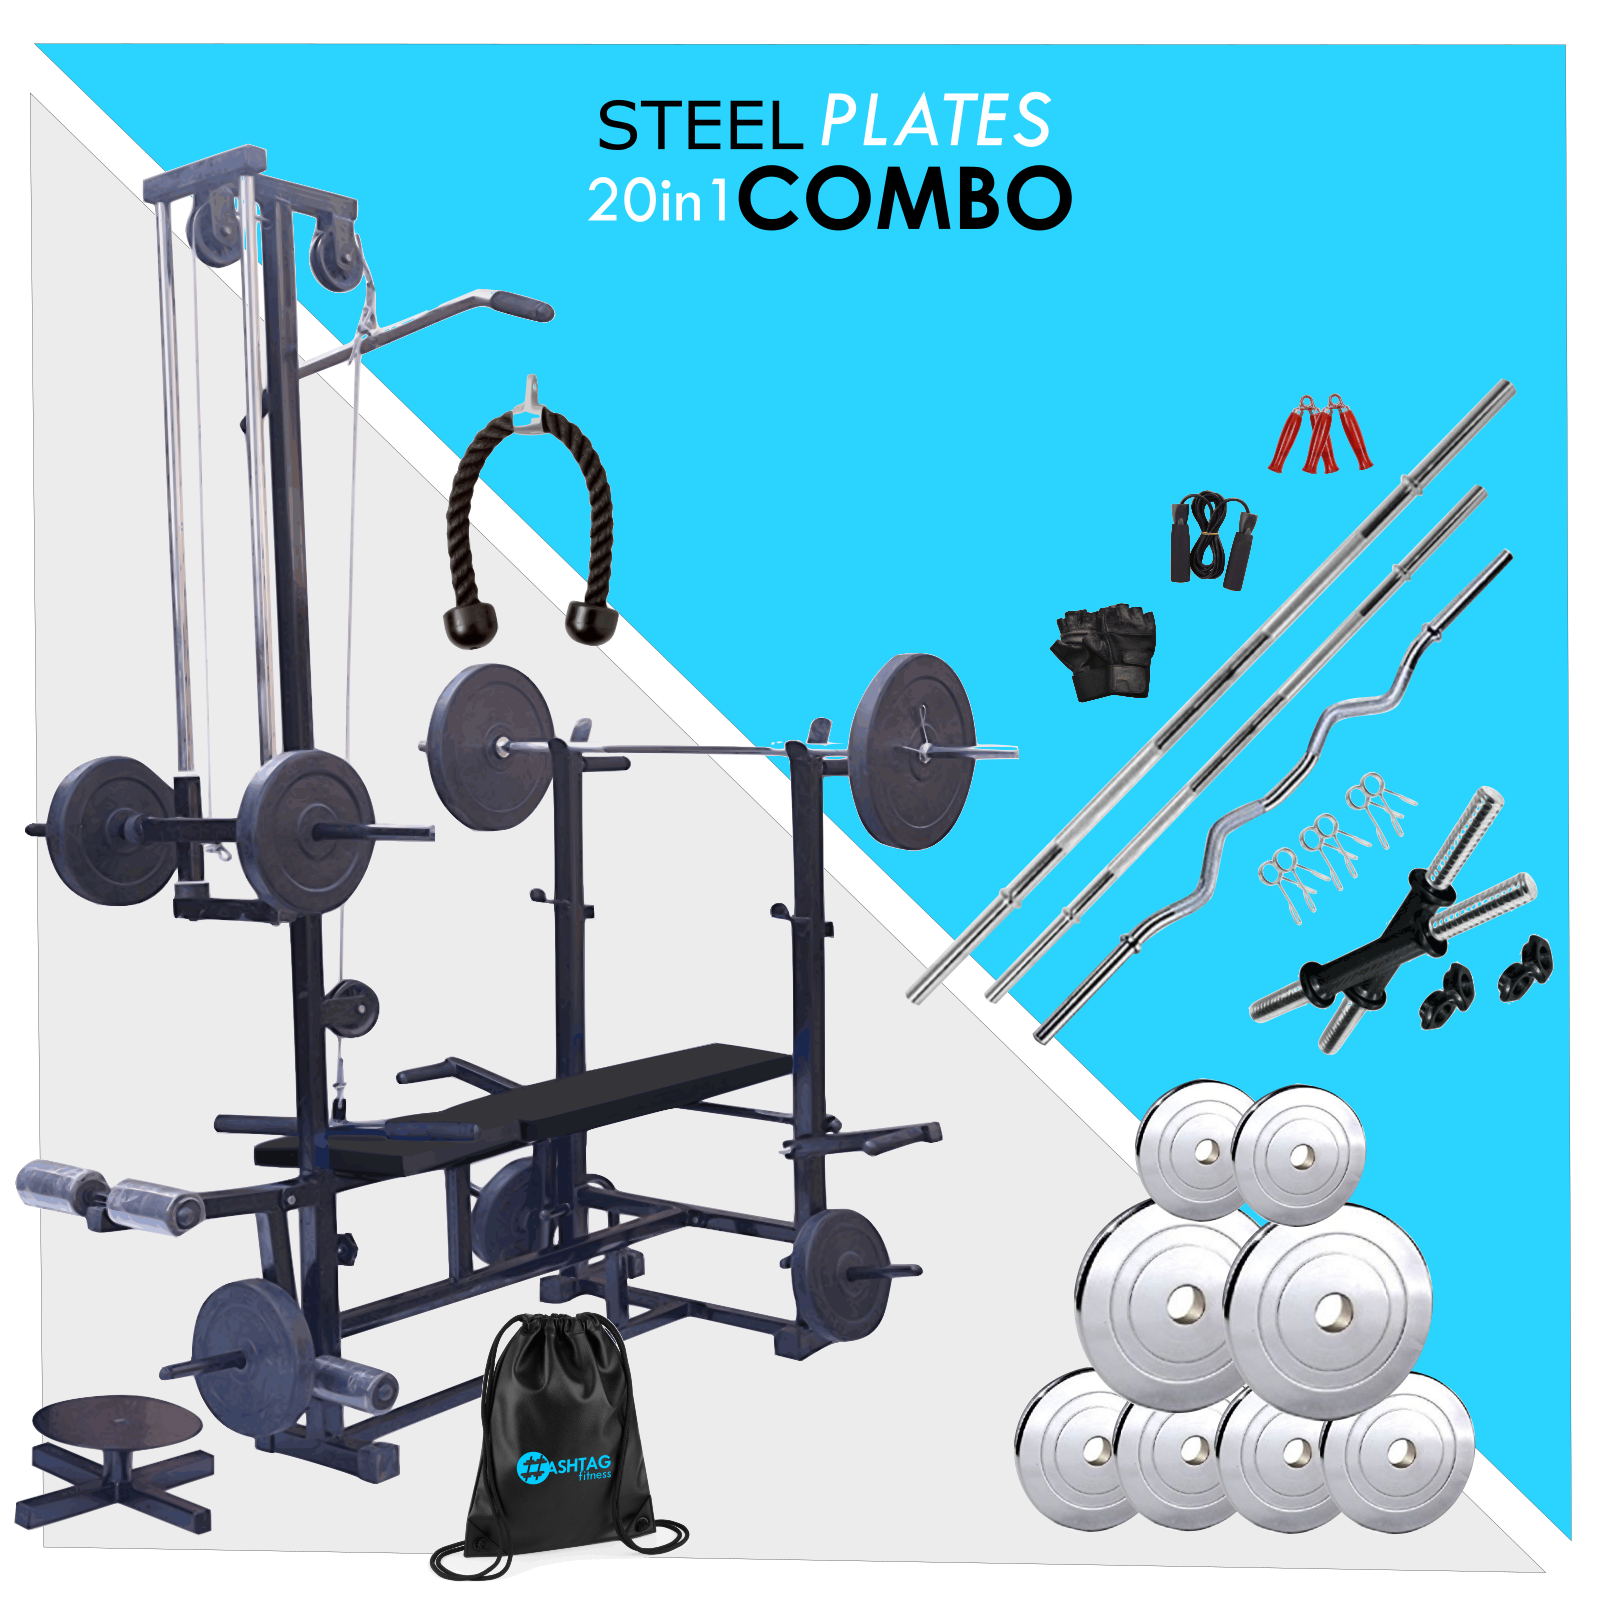 https://www.hashtagfitness.in/wp-content/uploads/2018/06/drawingsteel.png